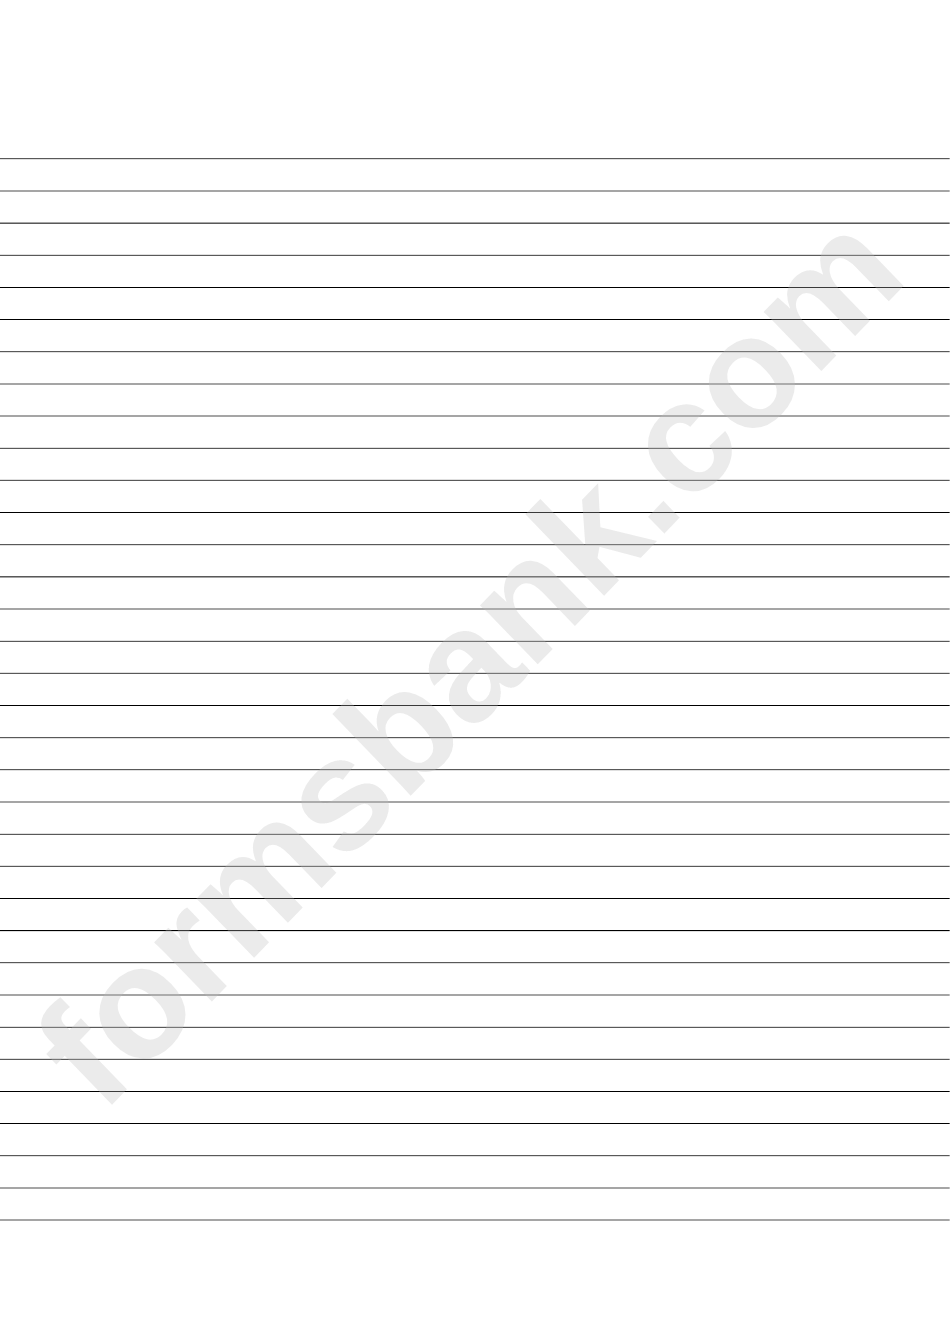 Lined Paper (Simple, Black On White)